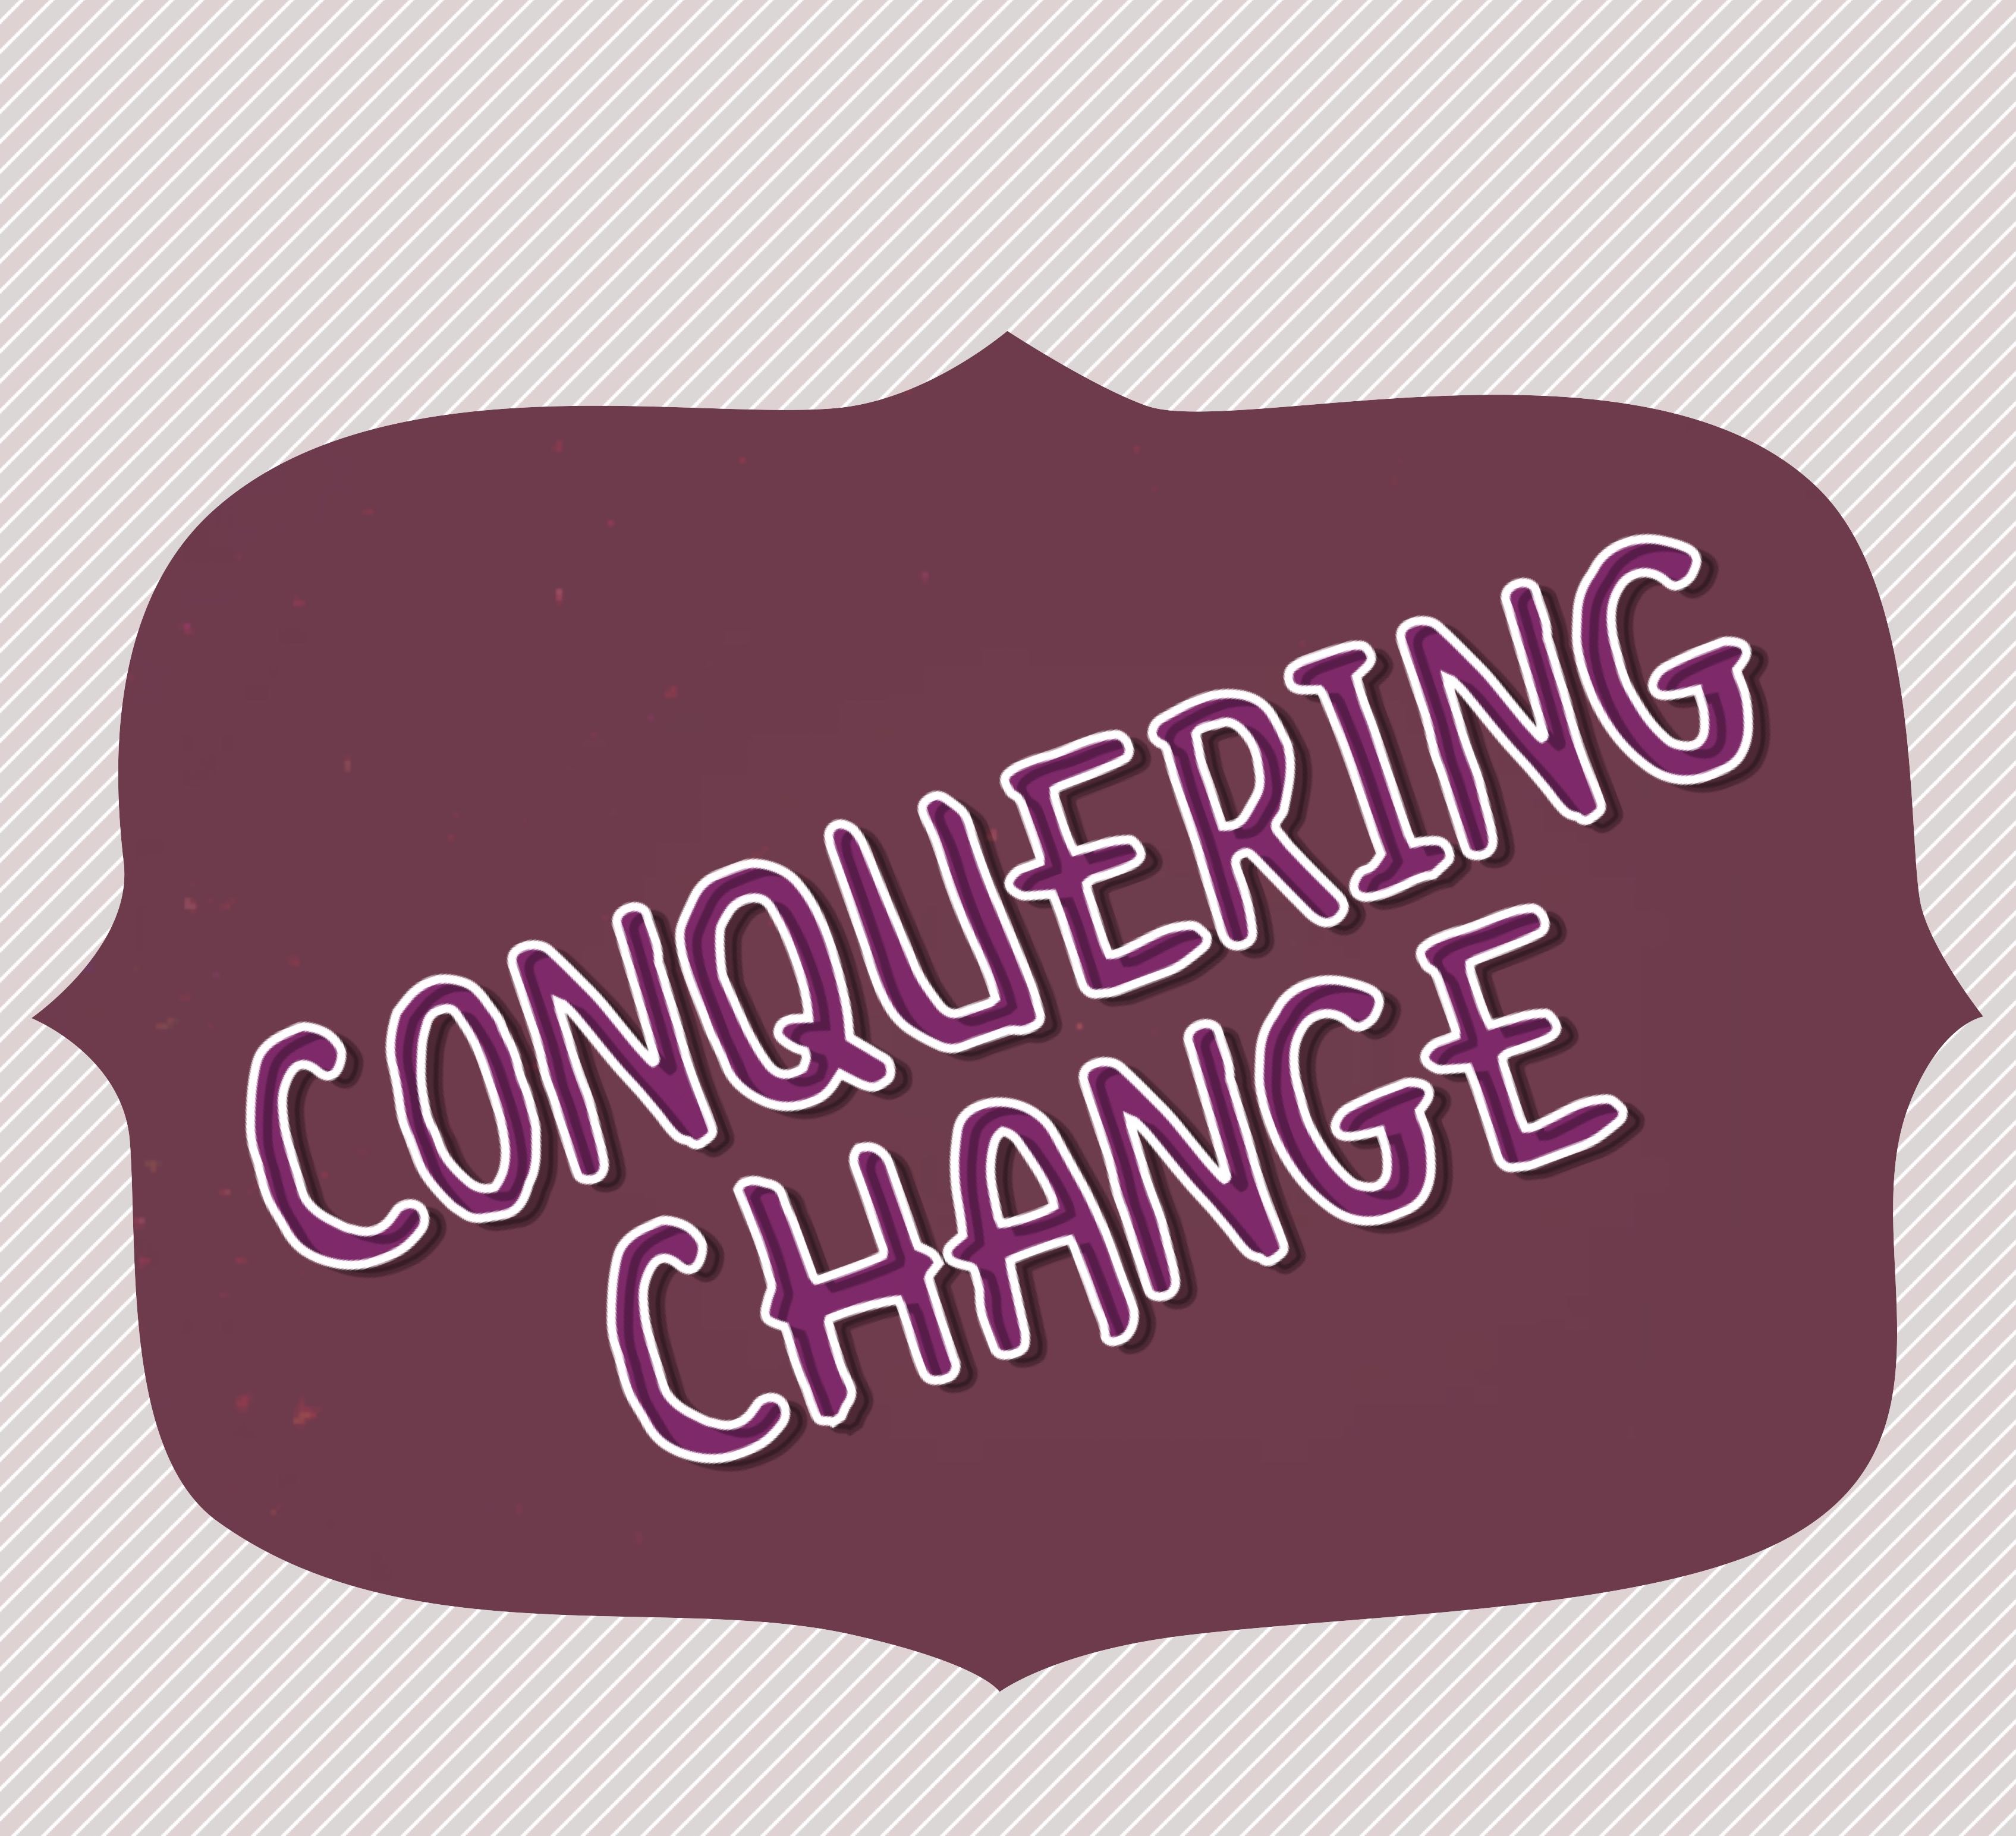 Conquering Change